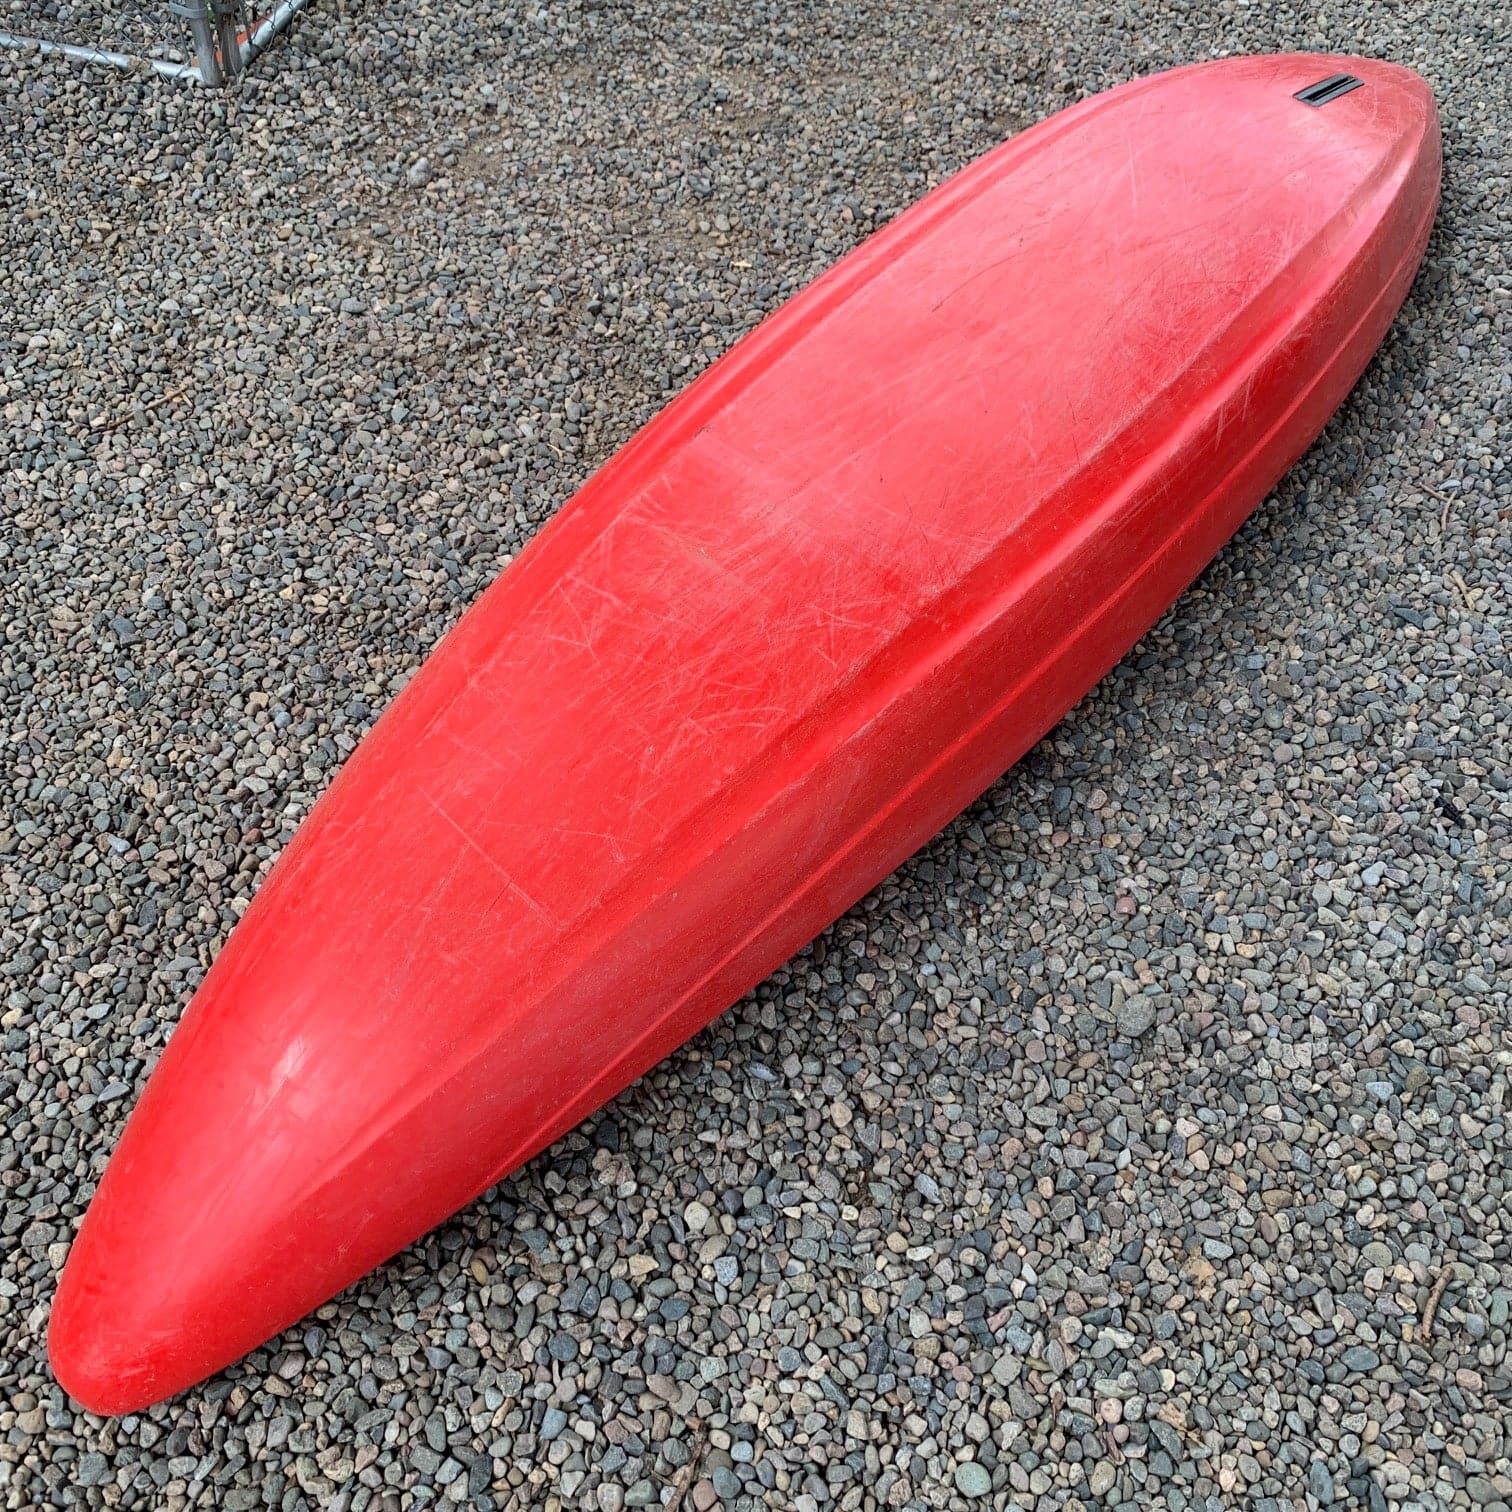 Featuring the Used Karma Traverse 10 used whitewater kayak manufactured by Jackson Kayak shown here from a second angle.